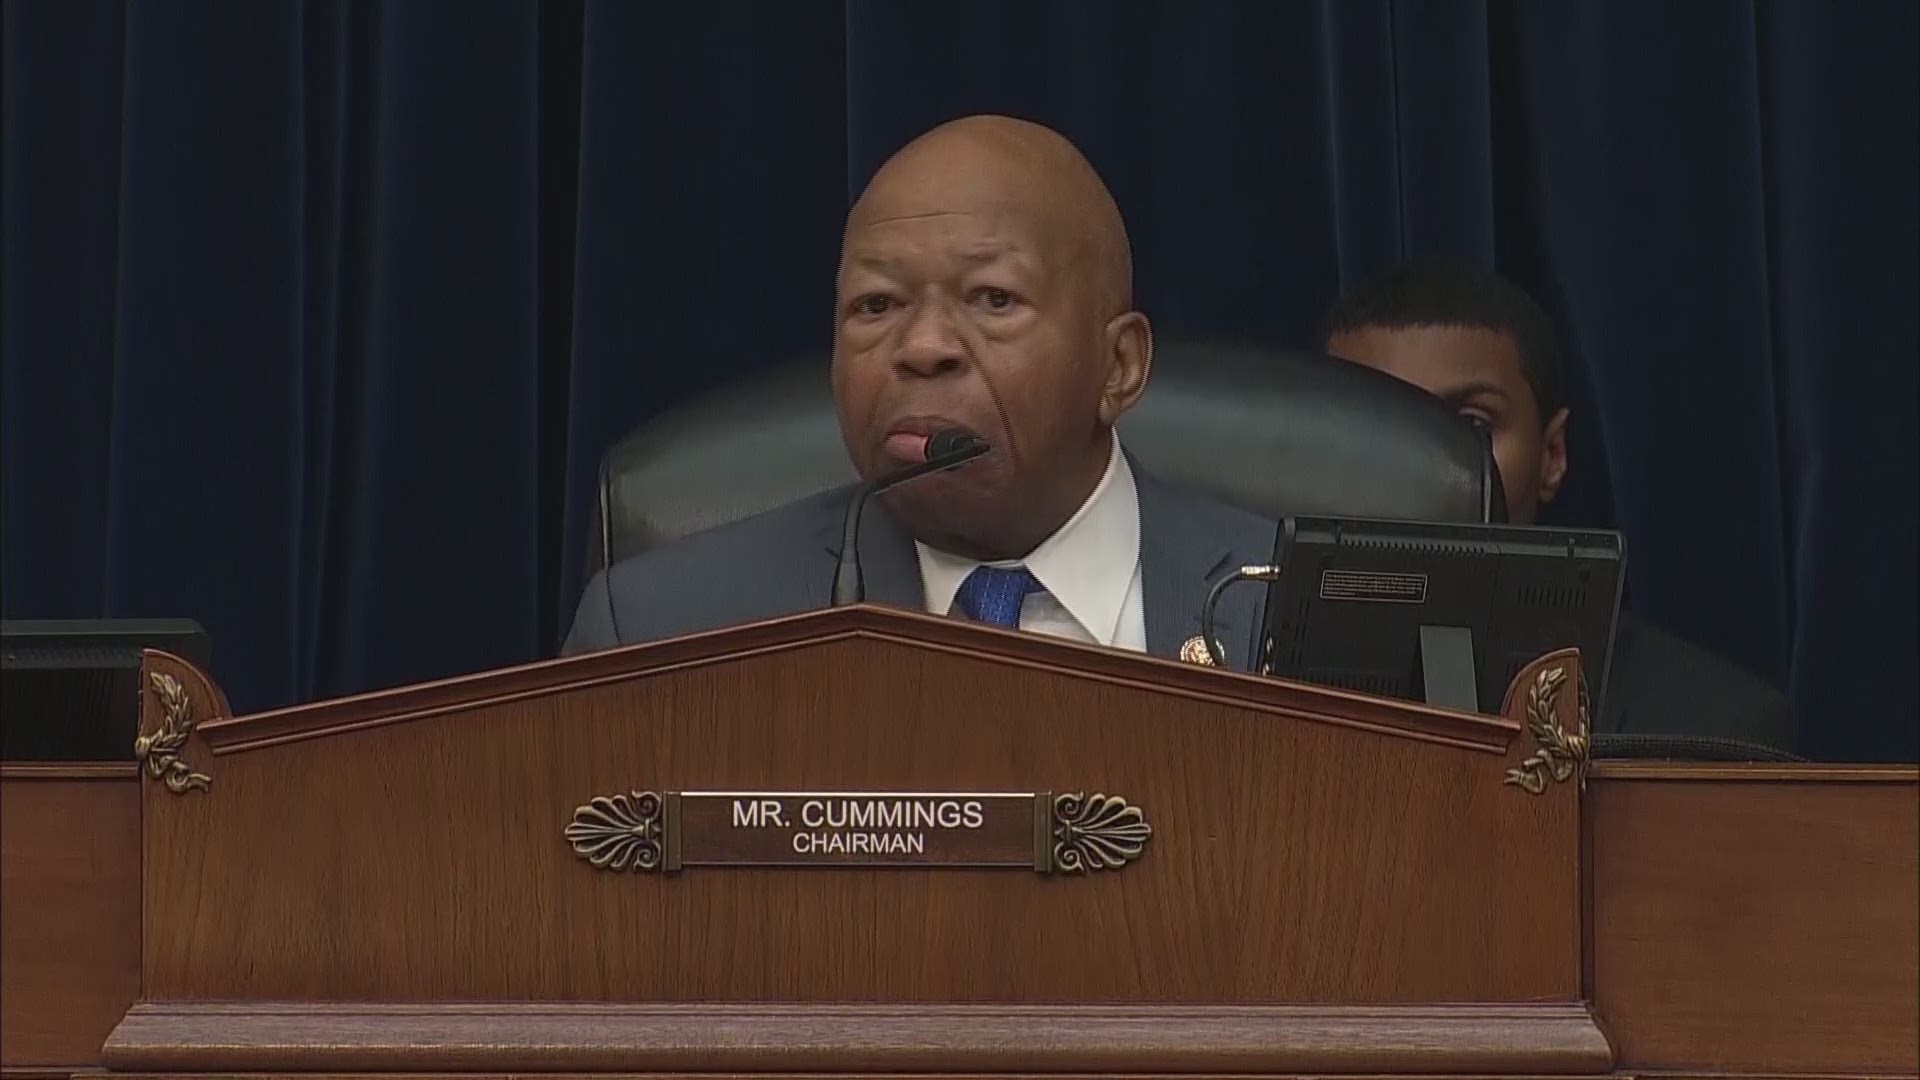 Rep. Elijah Cummings told Michael Cohen, Trump's former attorney, he believes this is part of Cohen's destiny and hopefully lead to a better Michael Cohen, Donald Trump, and better America.